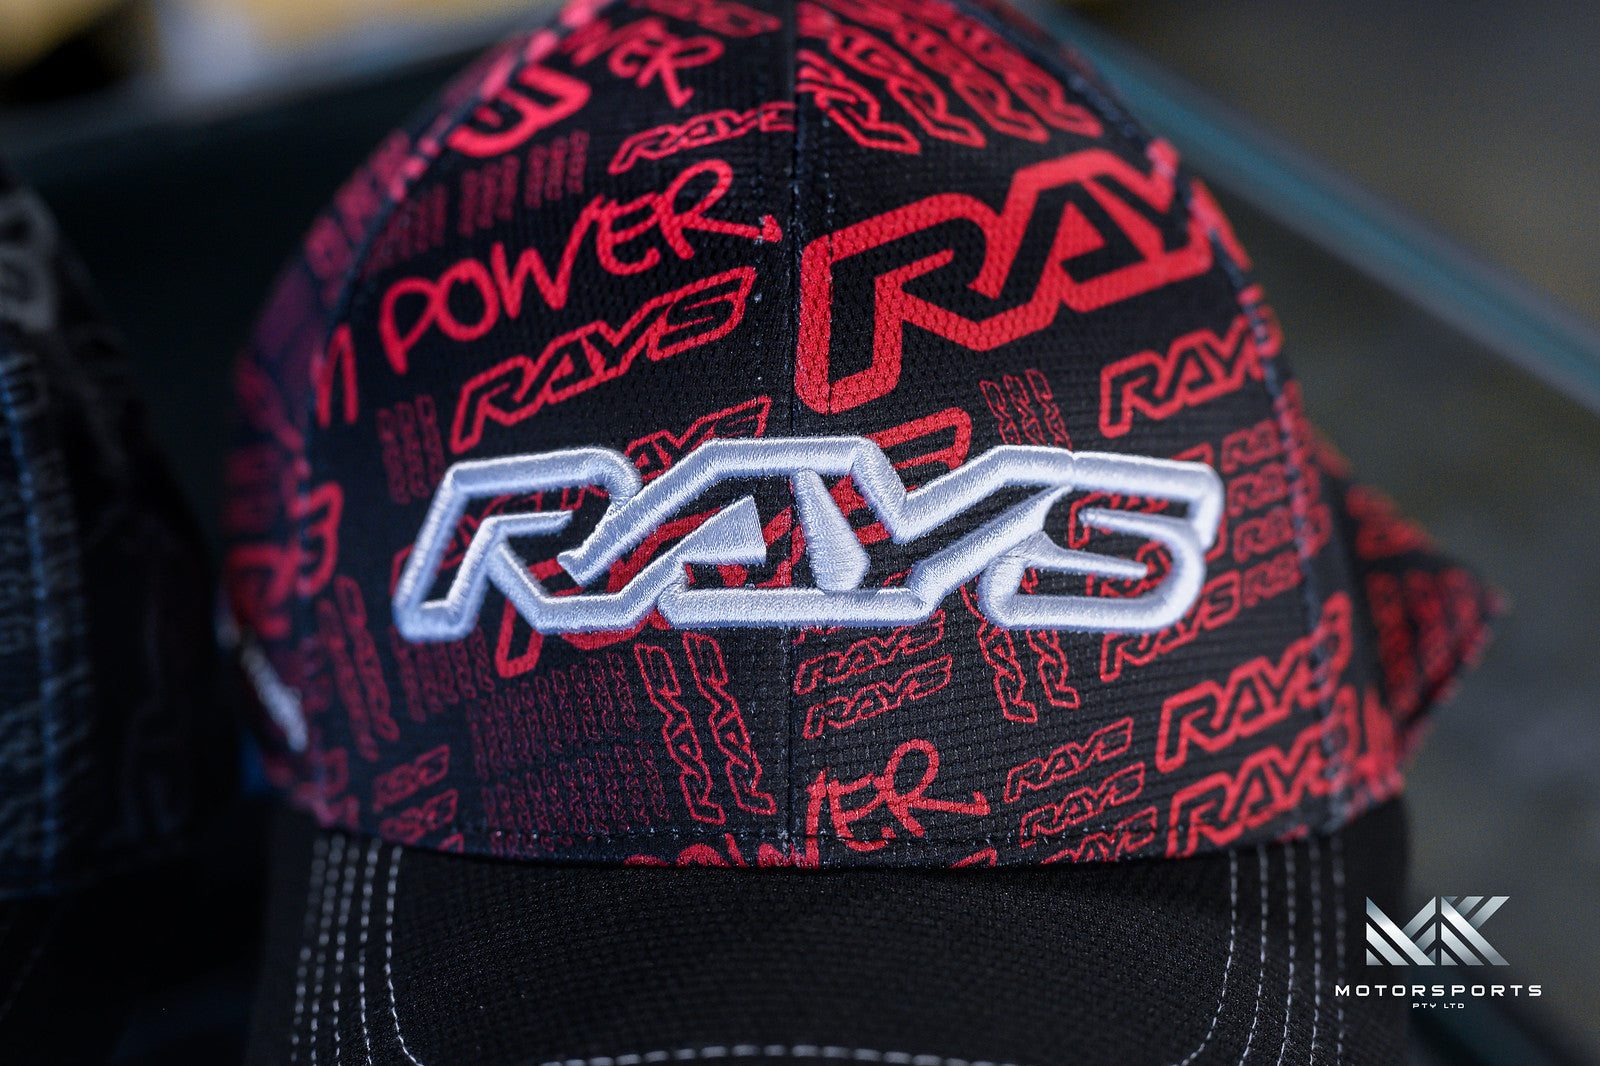 RAYS Official Cap - Premium Merchandise from Merch - From just $45.00! Shop now at MK MOTORSPORTS